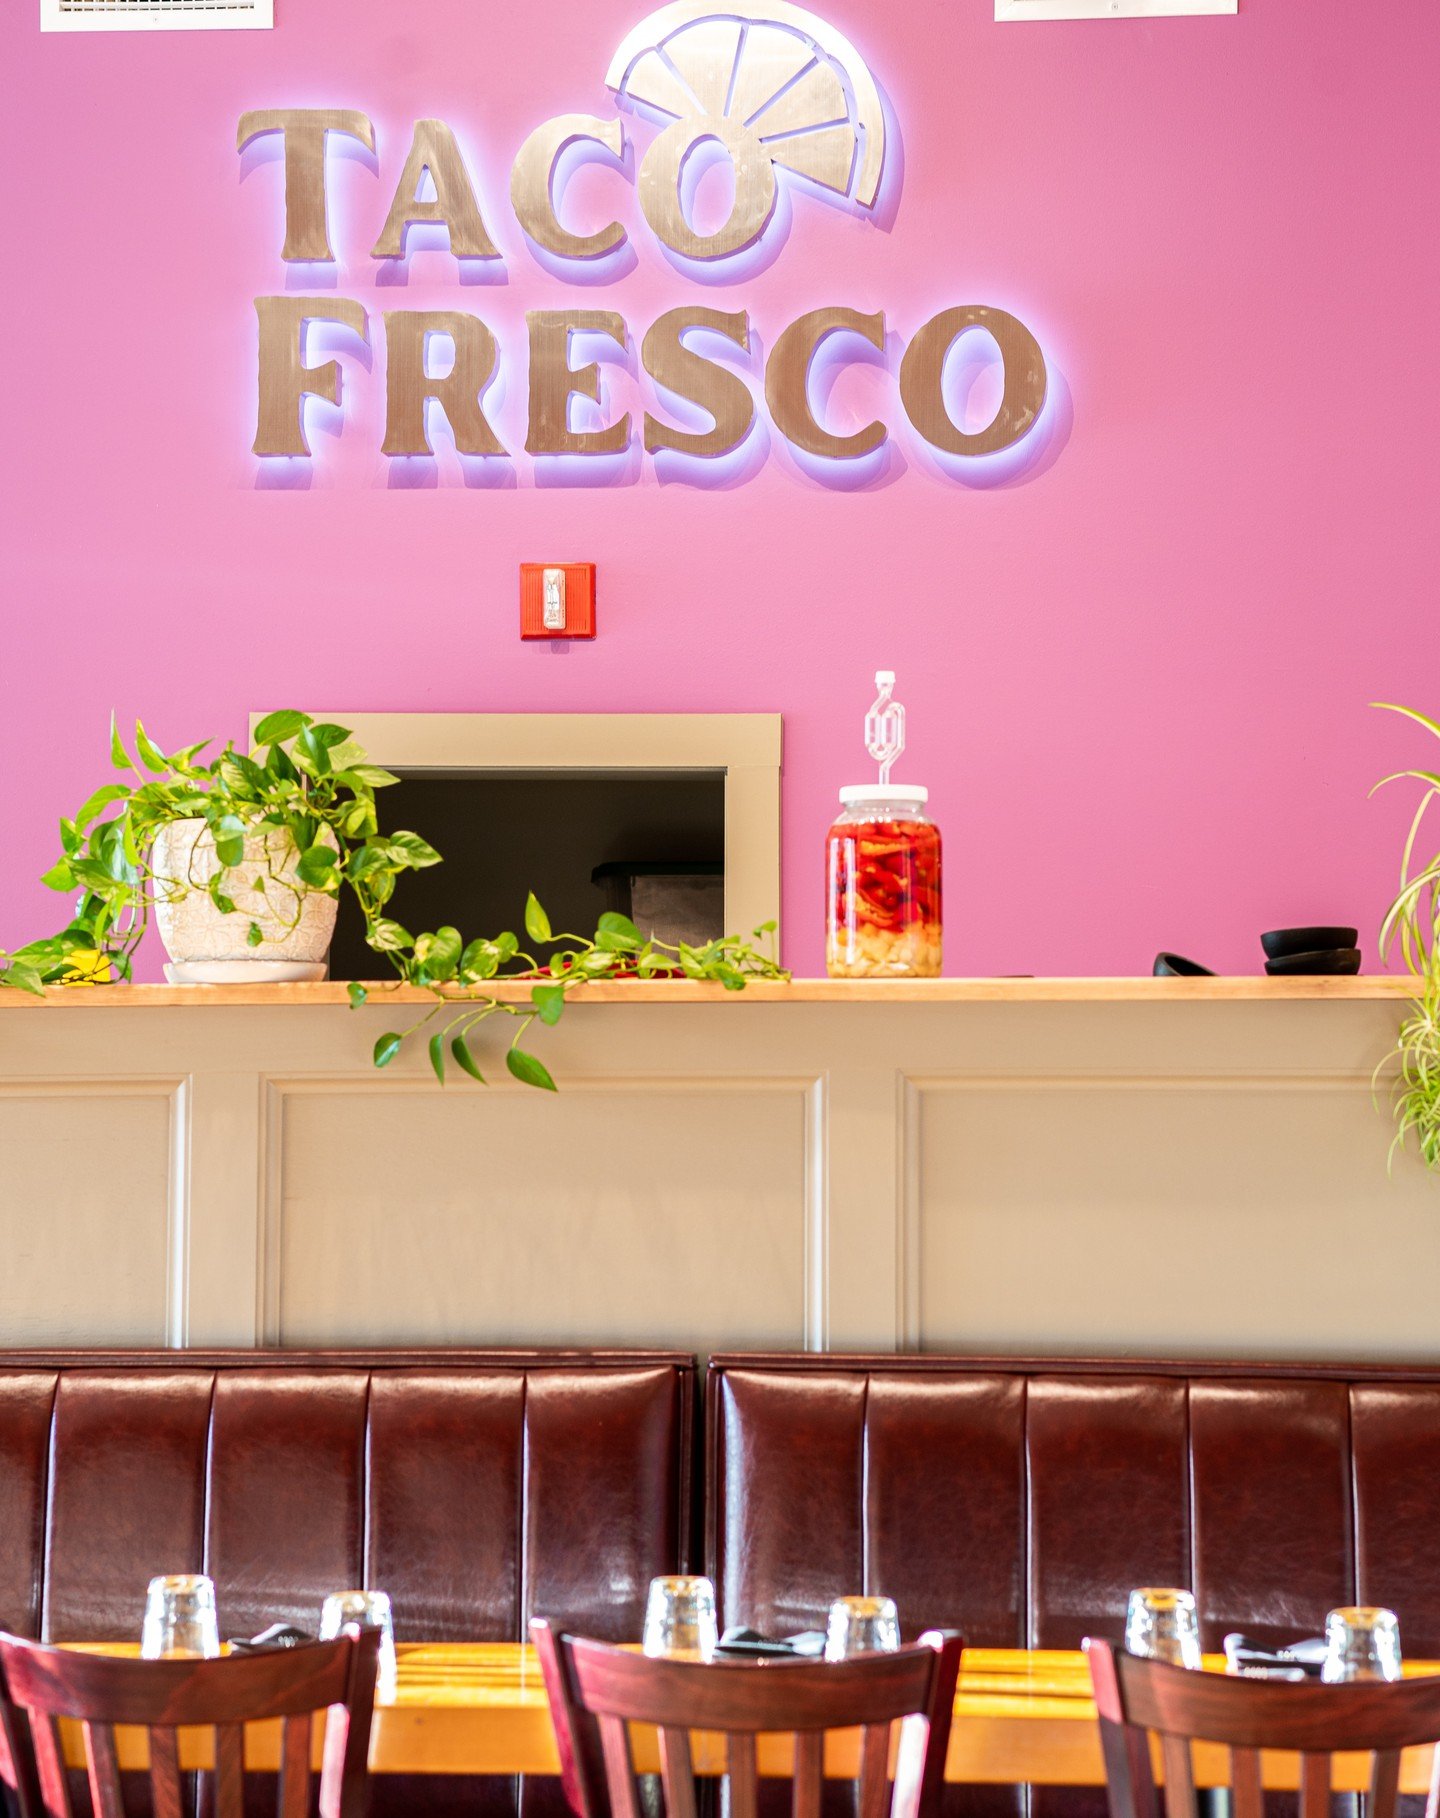 Feature Friday: Taco Fresco VT!

Chef Pat and restaurateur Mark Williams teamed up to bring a bit of authentic Mexican cuisine to our small city of Rutland, VT. It all started with a question: &ldquo;How about a taqueria and tequila bar?&rdquo;

With